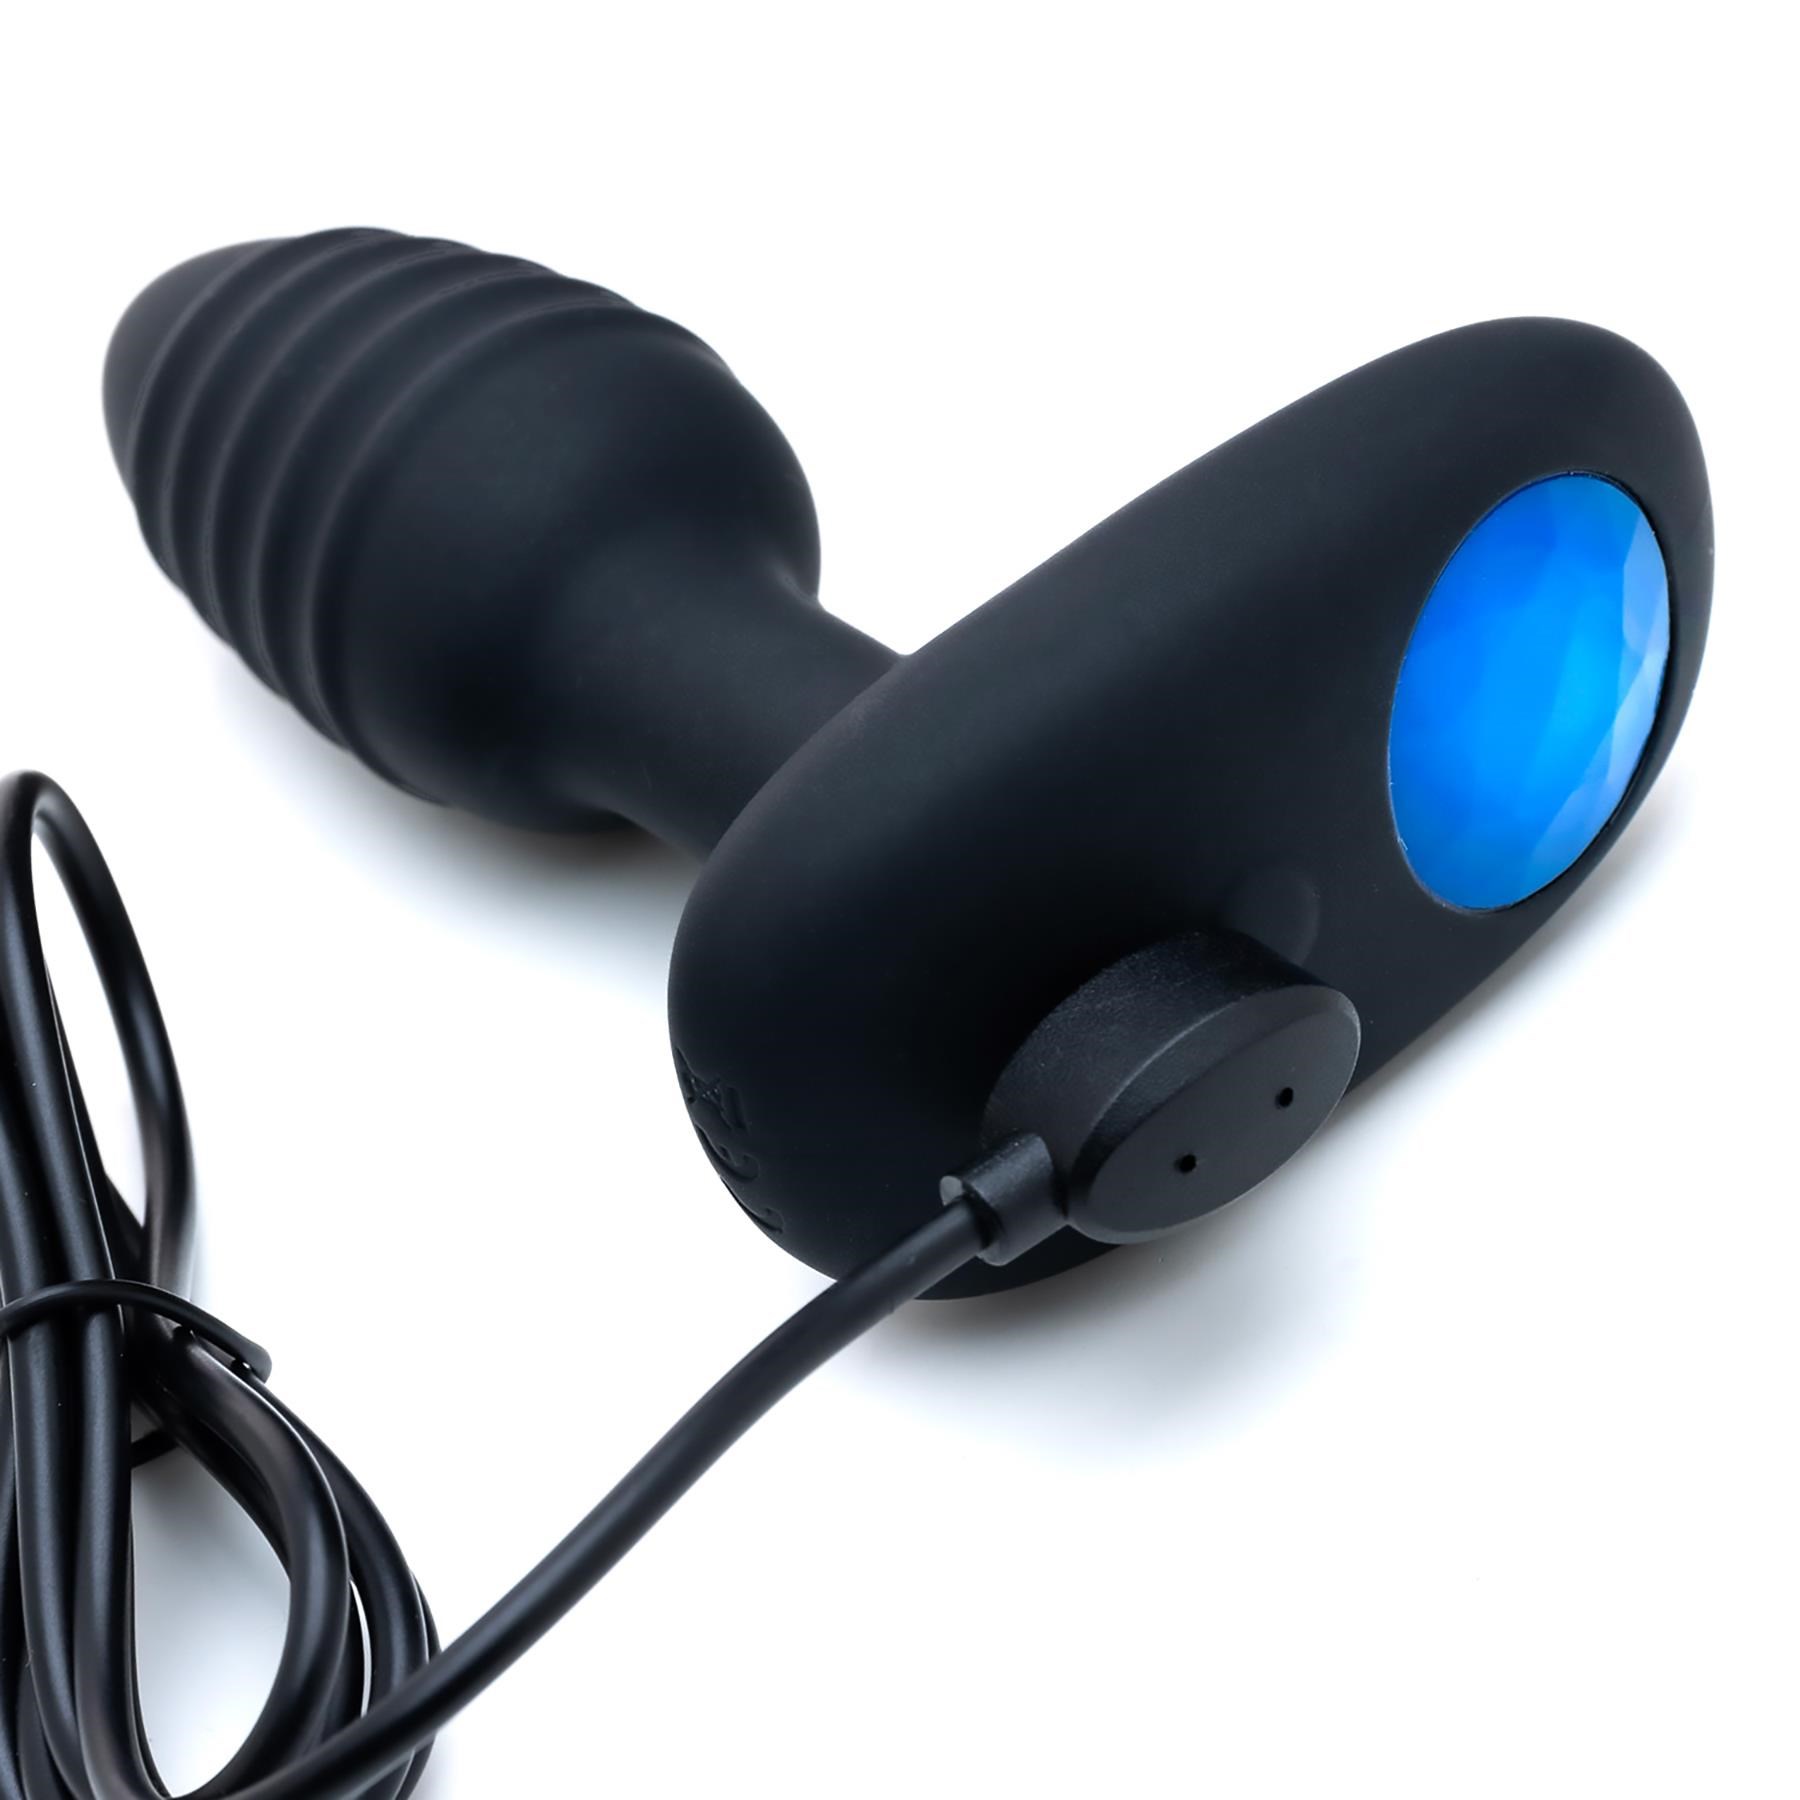 Lovelife Lumen Bluetooth Vibrating Anal Plug - Showing Where Charging Cable is Placed